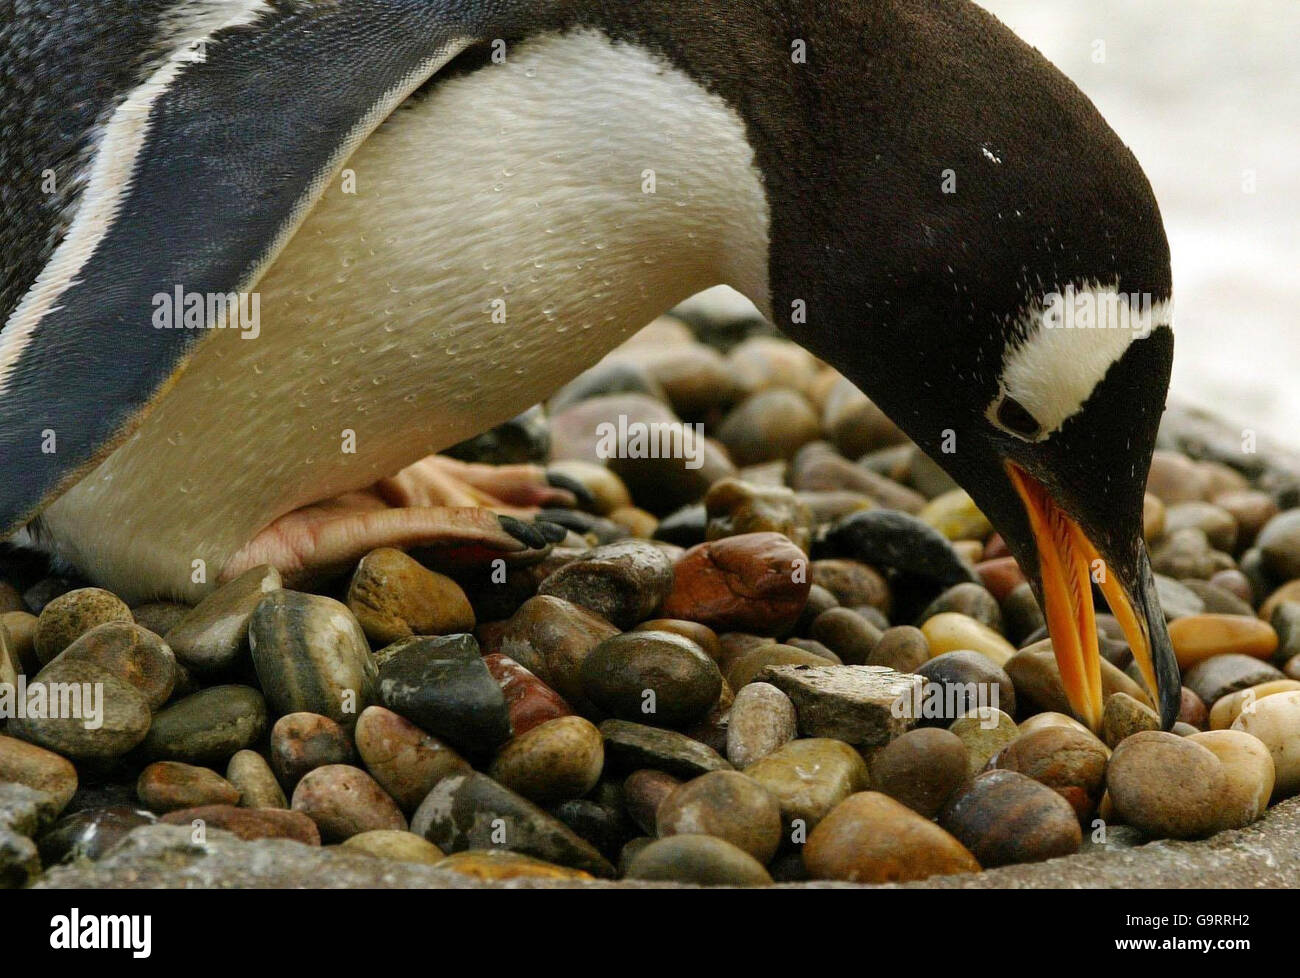 Edinburgh Zoo's Gentoo penguins begin their courtship displays, with the male looking for the smoothest pebbles to present to their chosen female, which will last for the following 4-6 weeks. Stock Photo